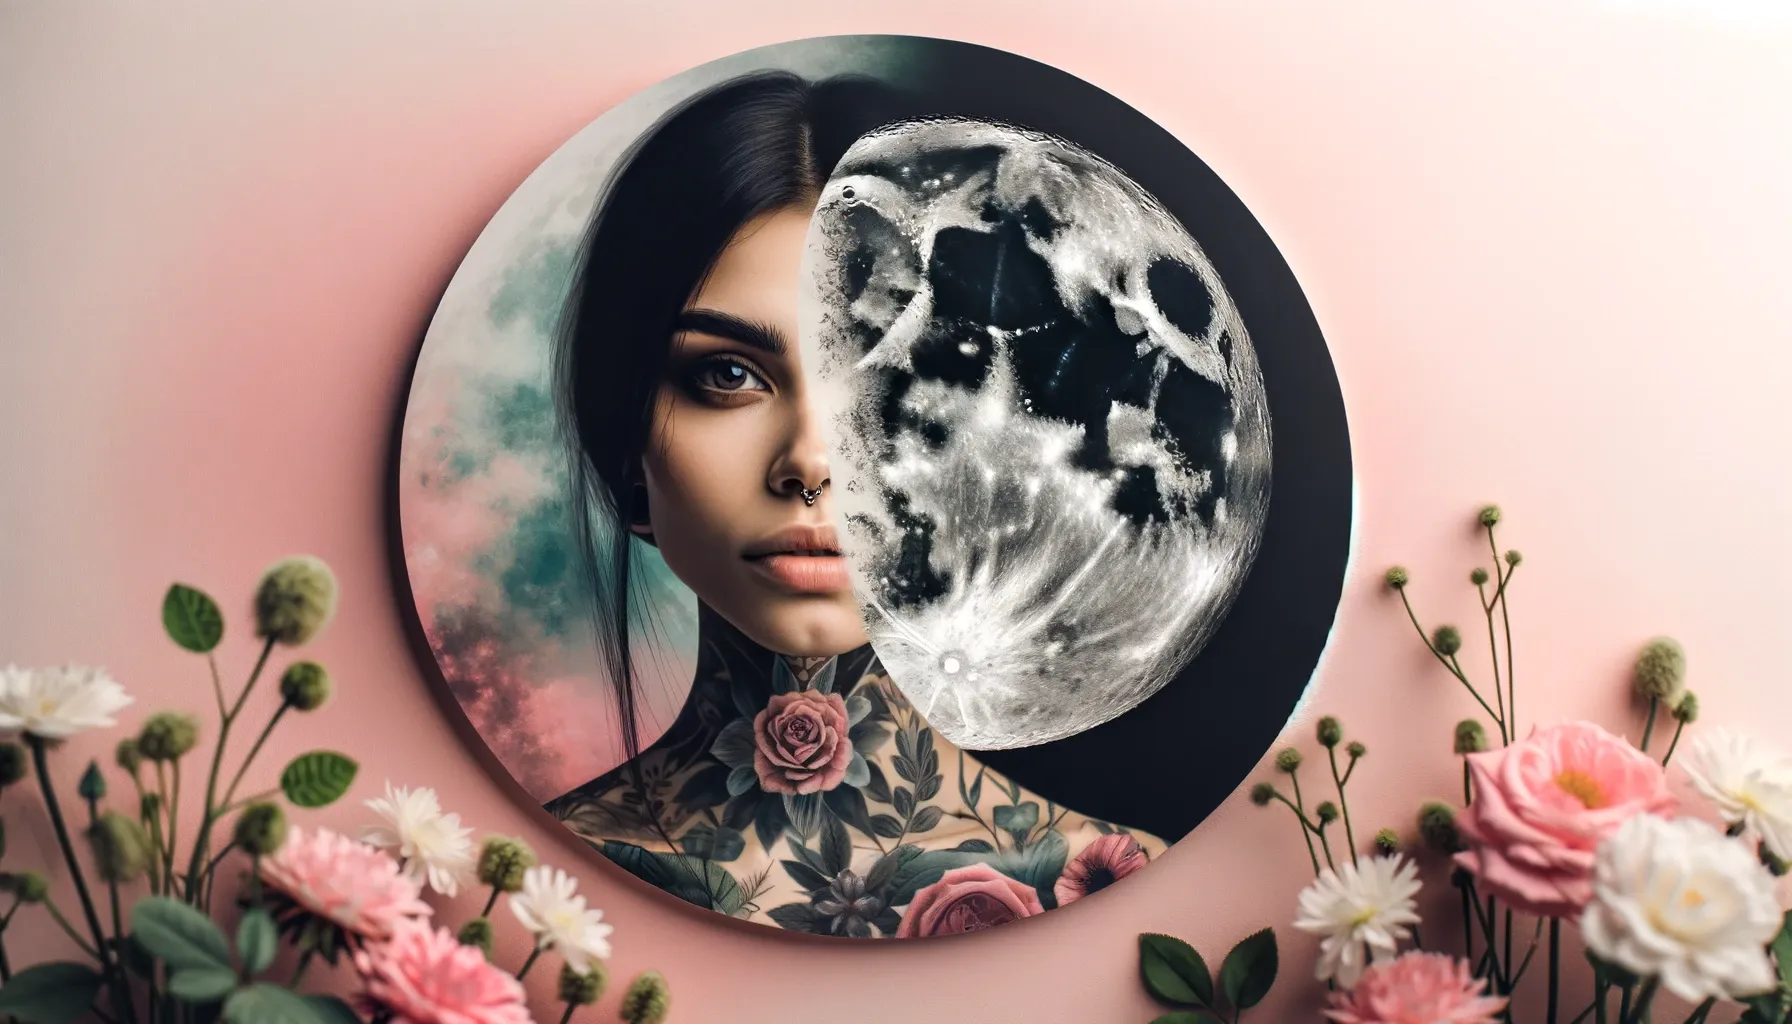 A woman with tattoos is artistically blended in with the Waning Gibbous moon in front of pink and green flowers on a painted image hanging on a wall.